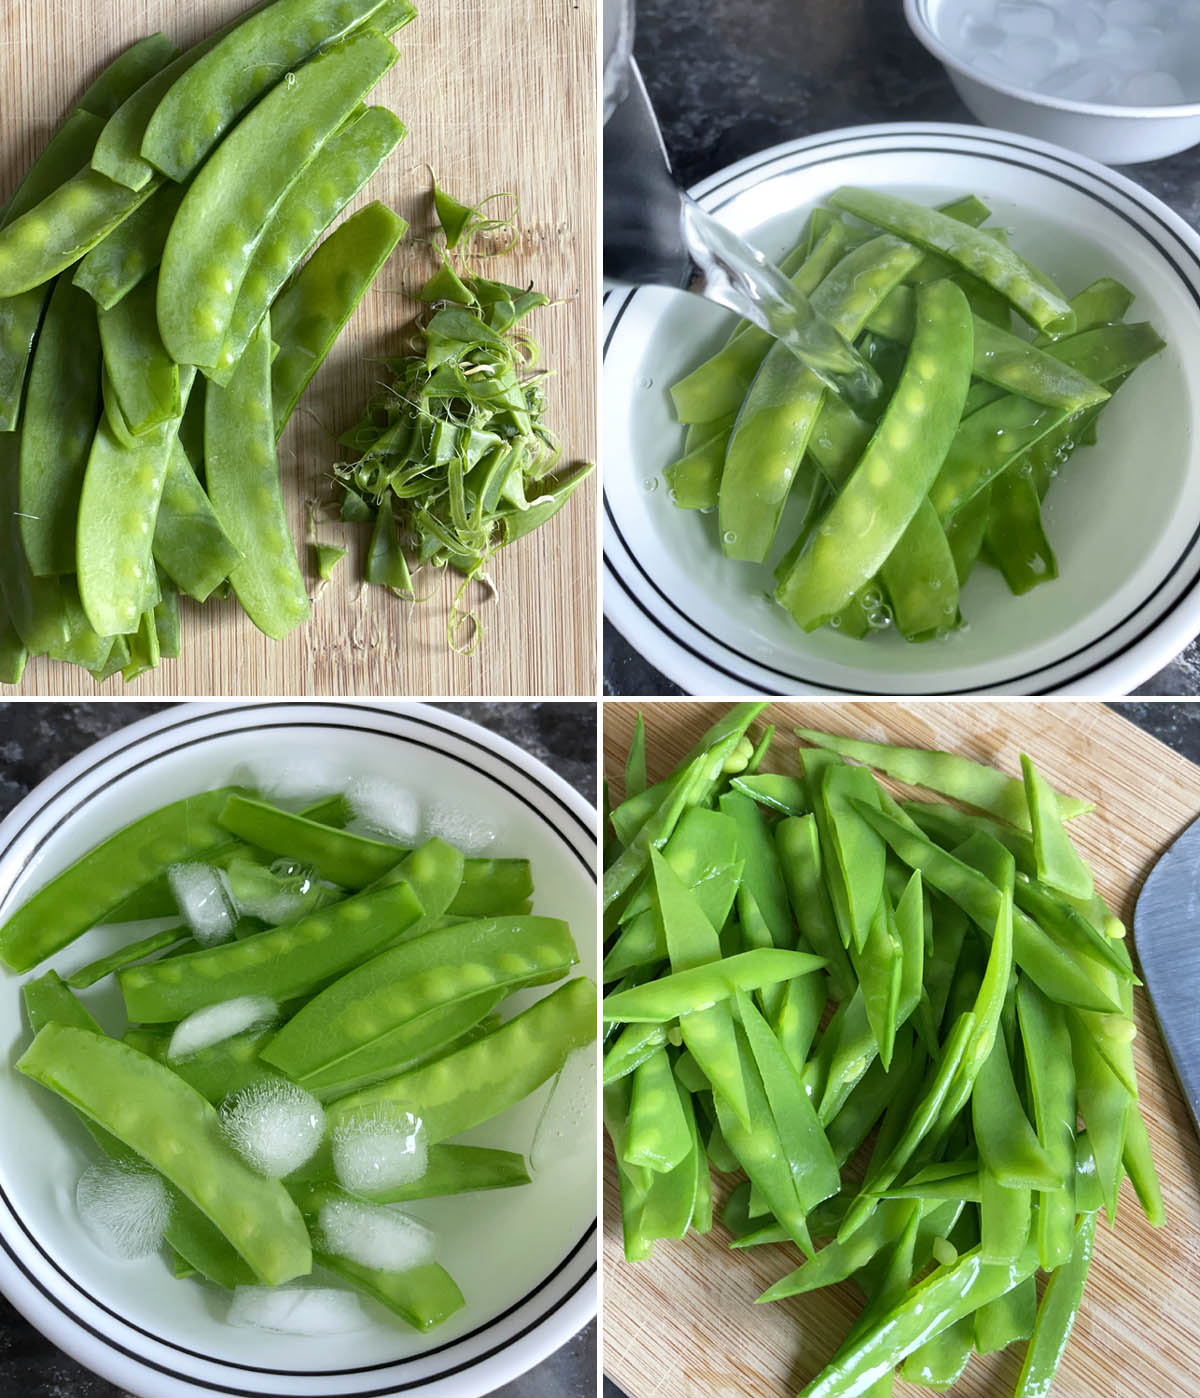 Green snow peas with the tips and strings removed, submerged in water in a bowl, and cut into strips.